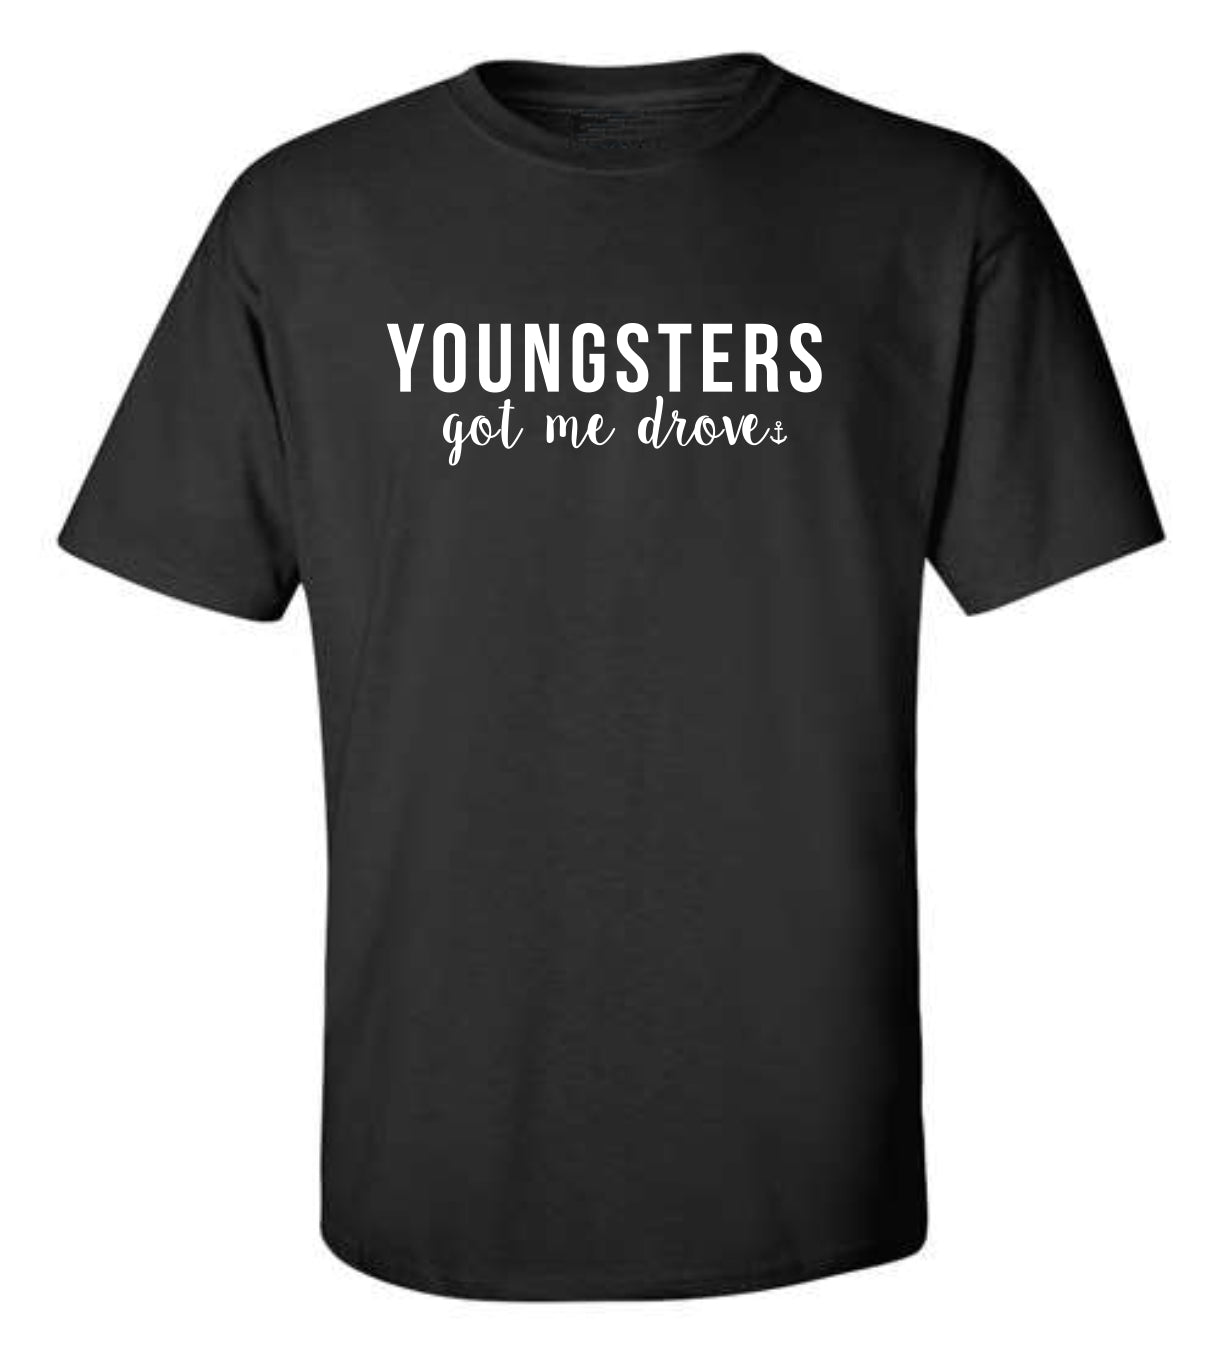 "Youngsters Got Me Drove" T-shirt